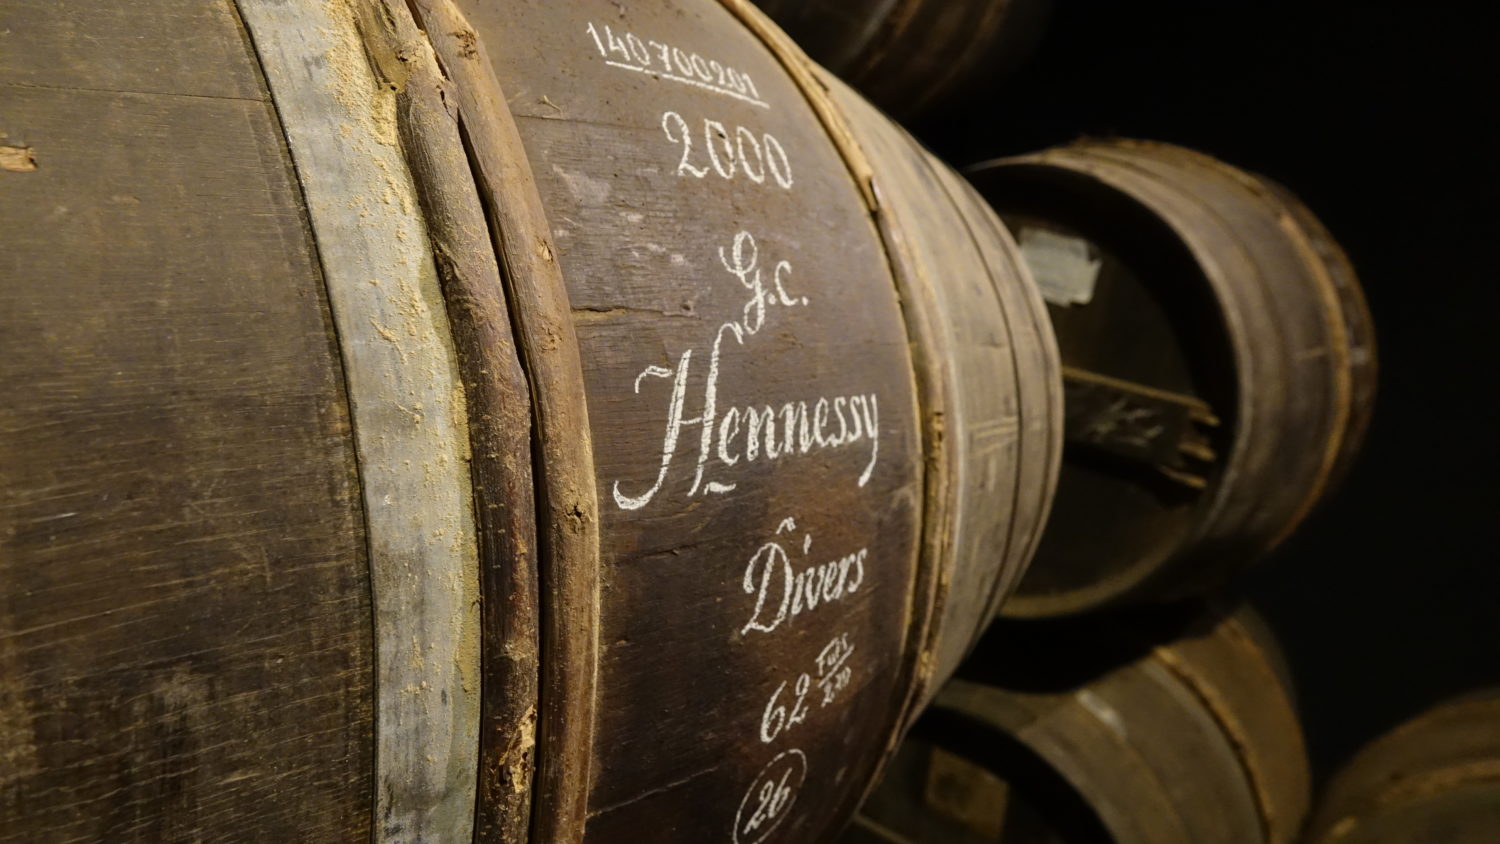 Aging of Hennessy cognac